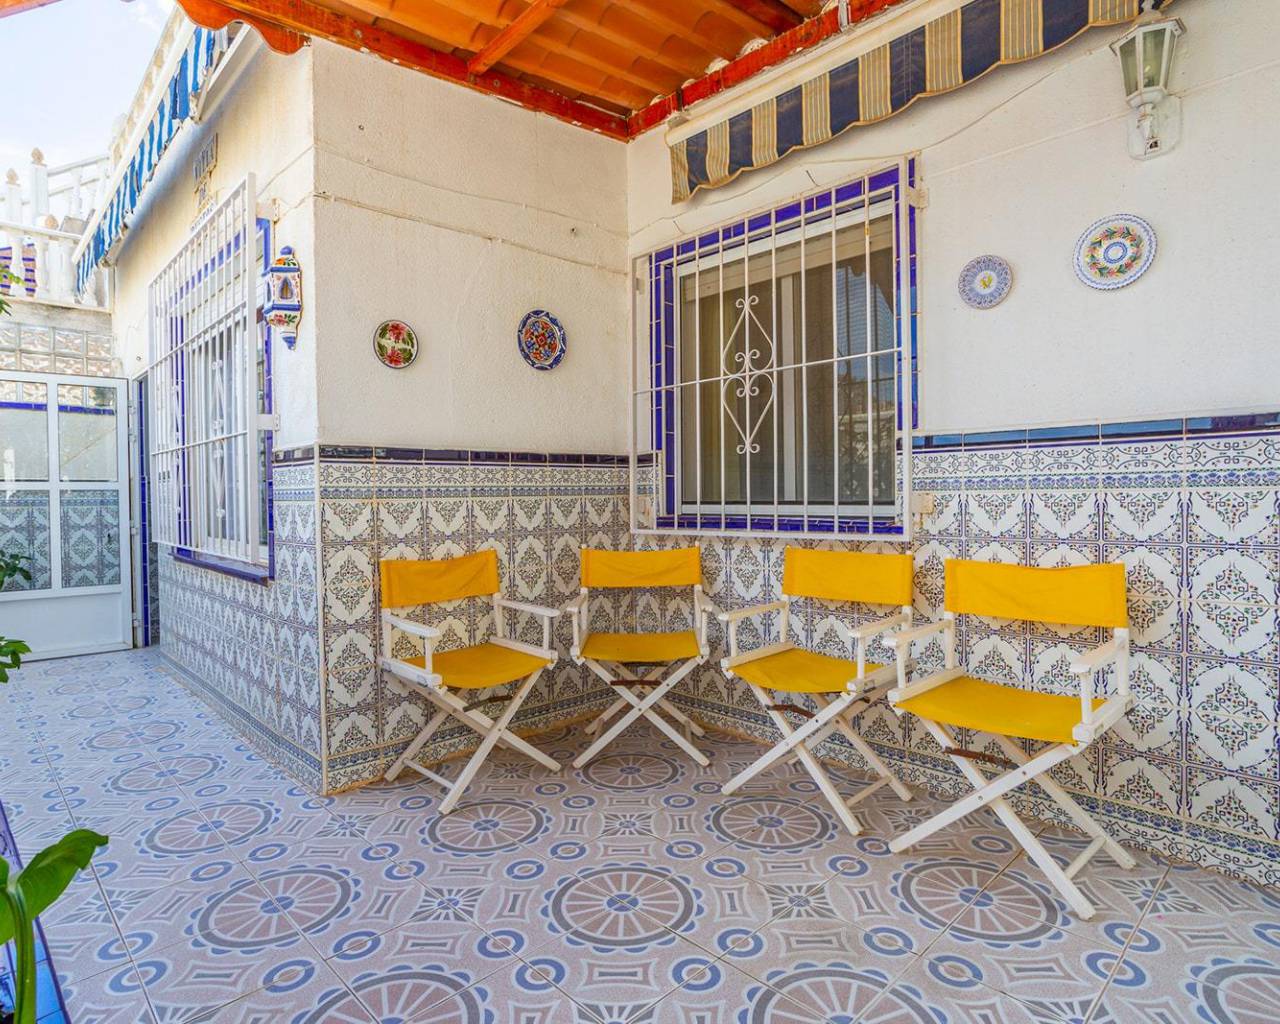 Sale - Maison individuelle - Torrevieja - Doña ines